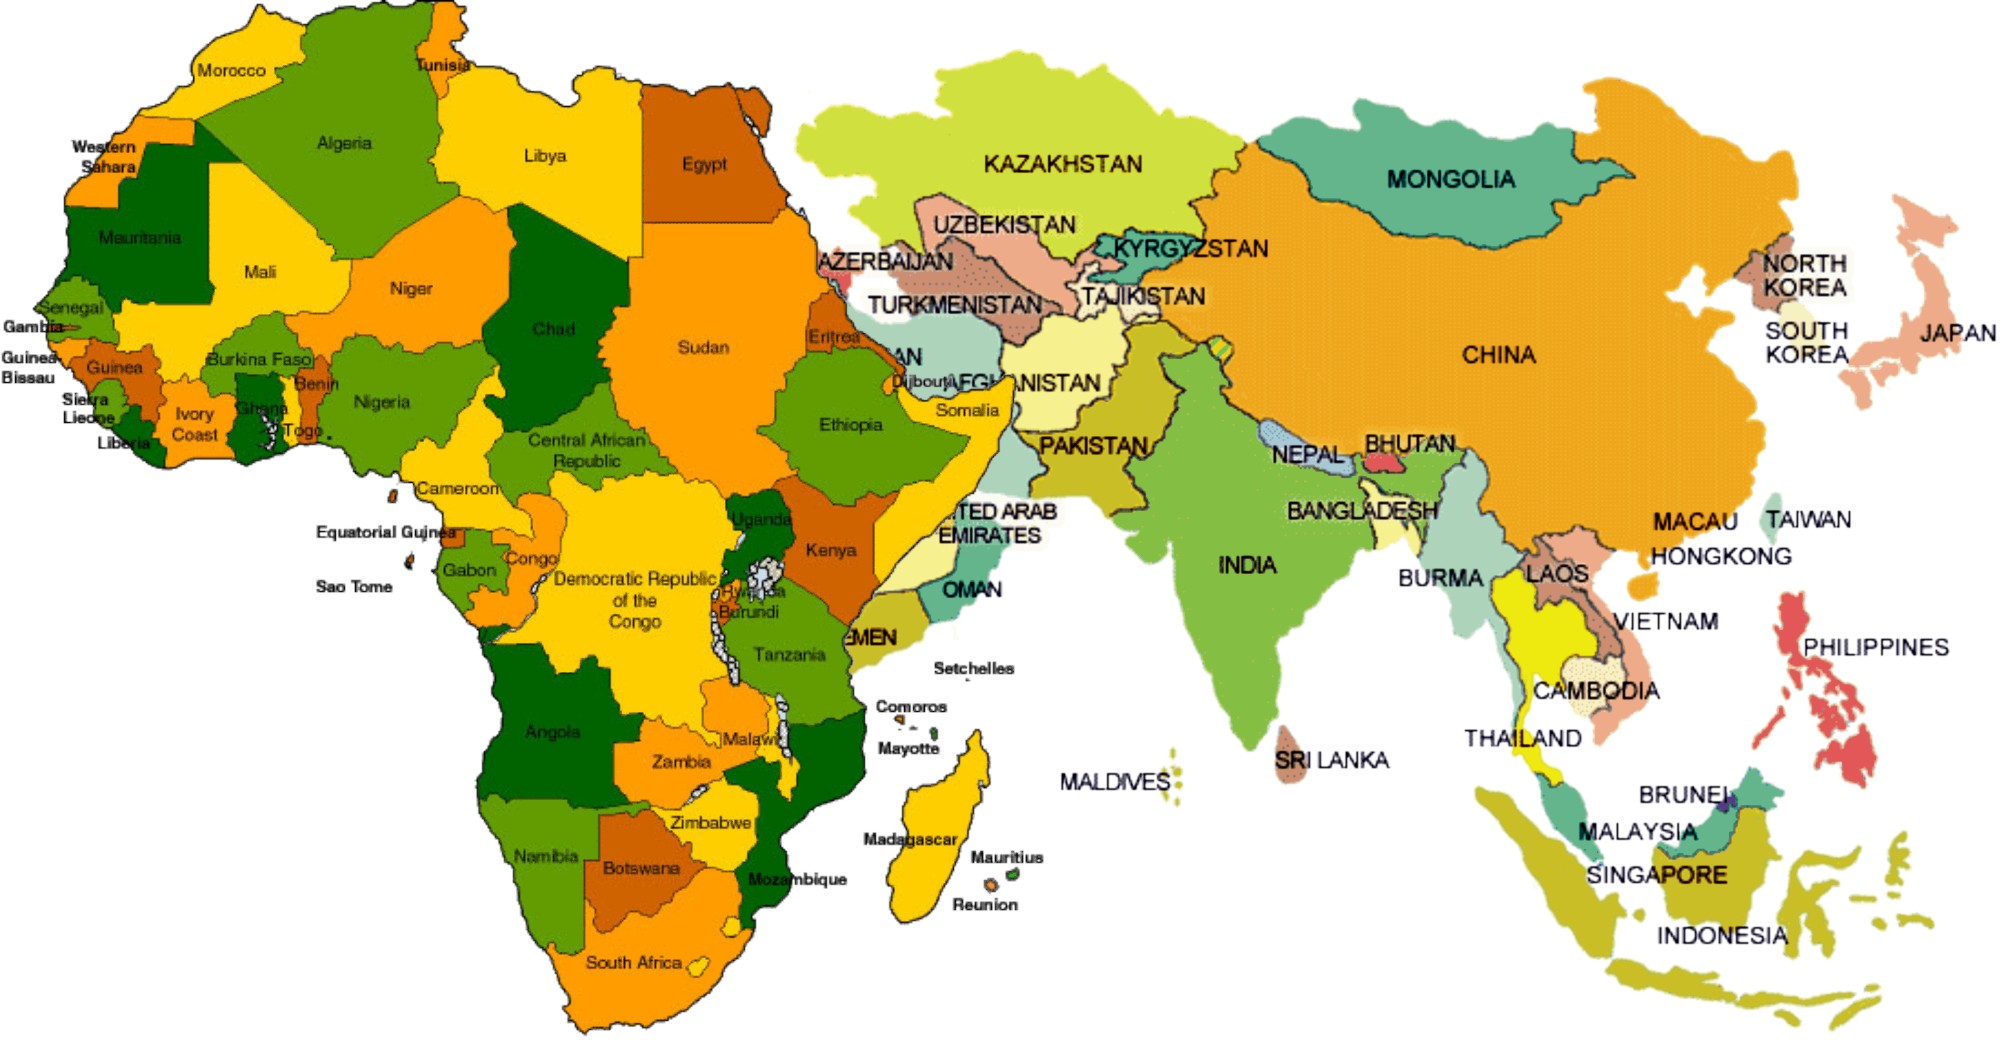 AFRICA ASIA MAP 